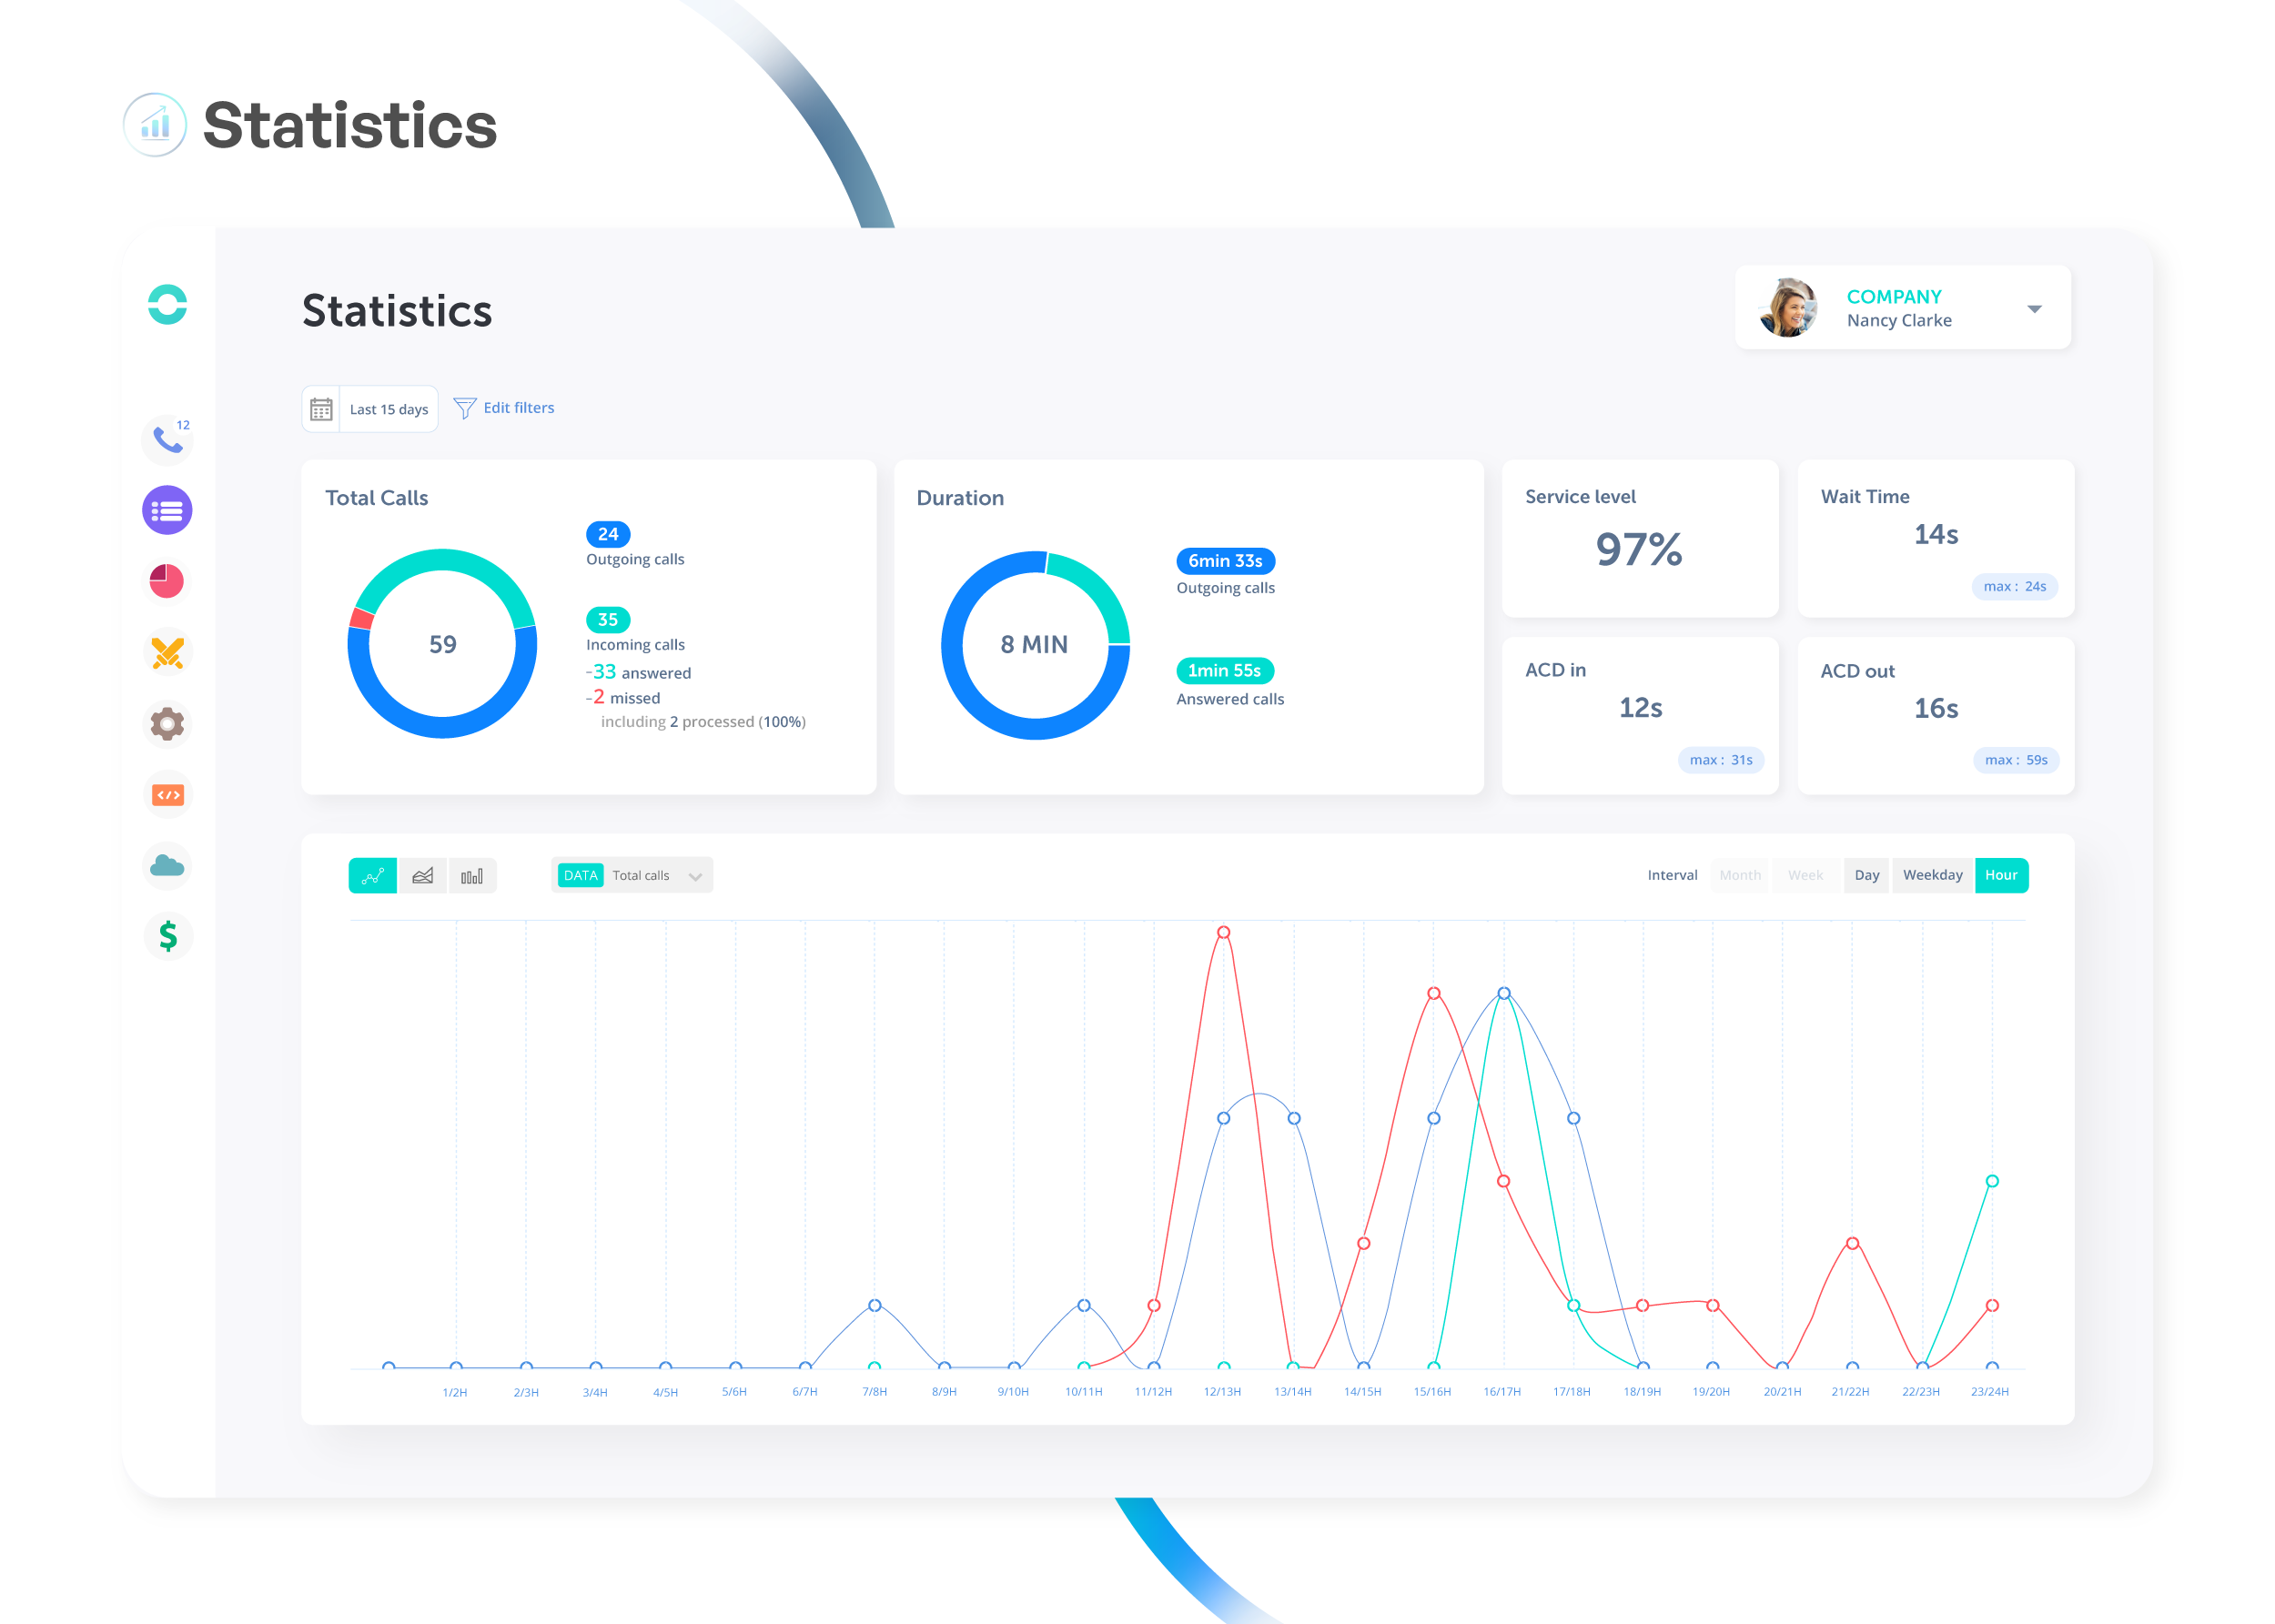 Gain business insight from real-time analytics